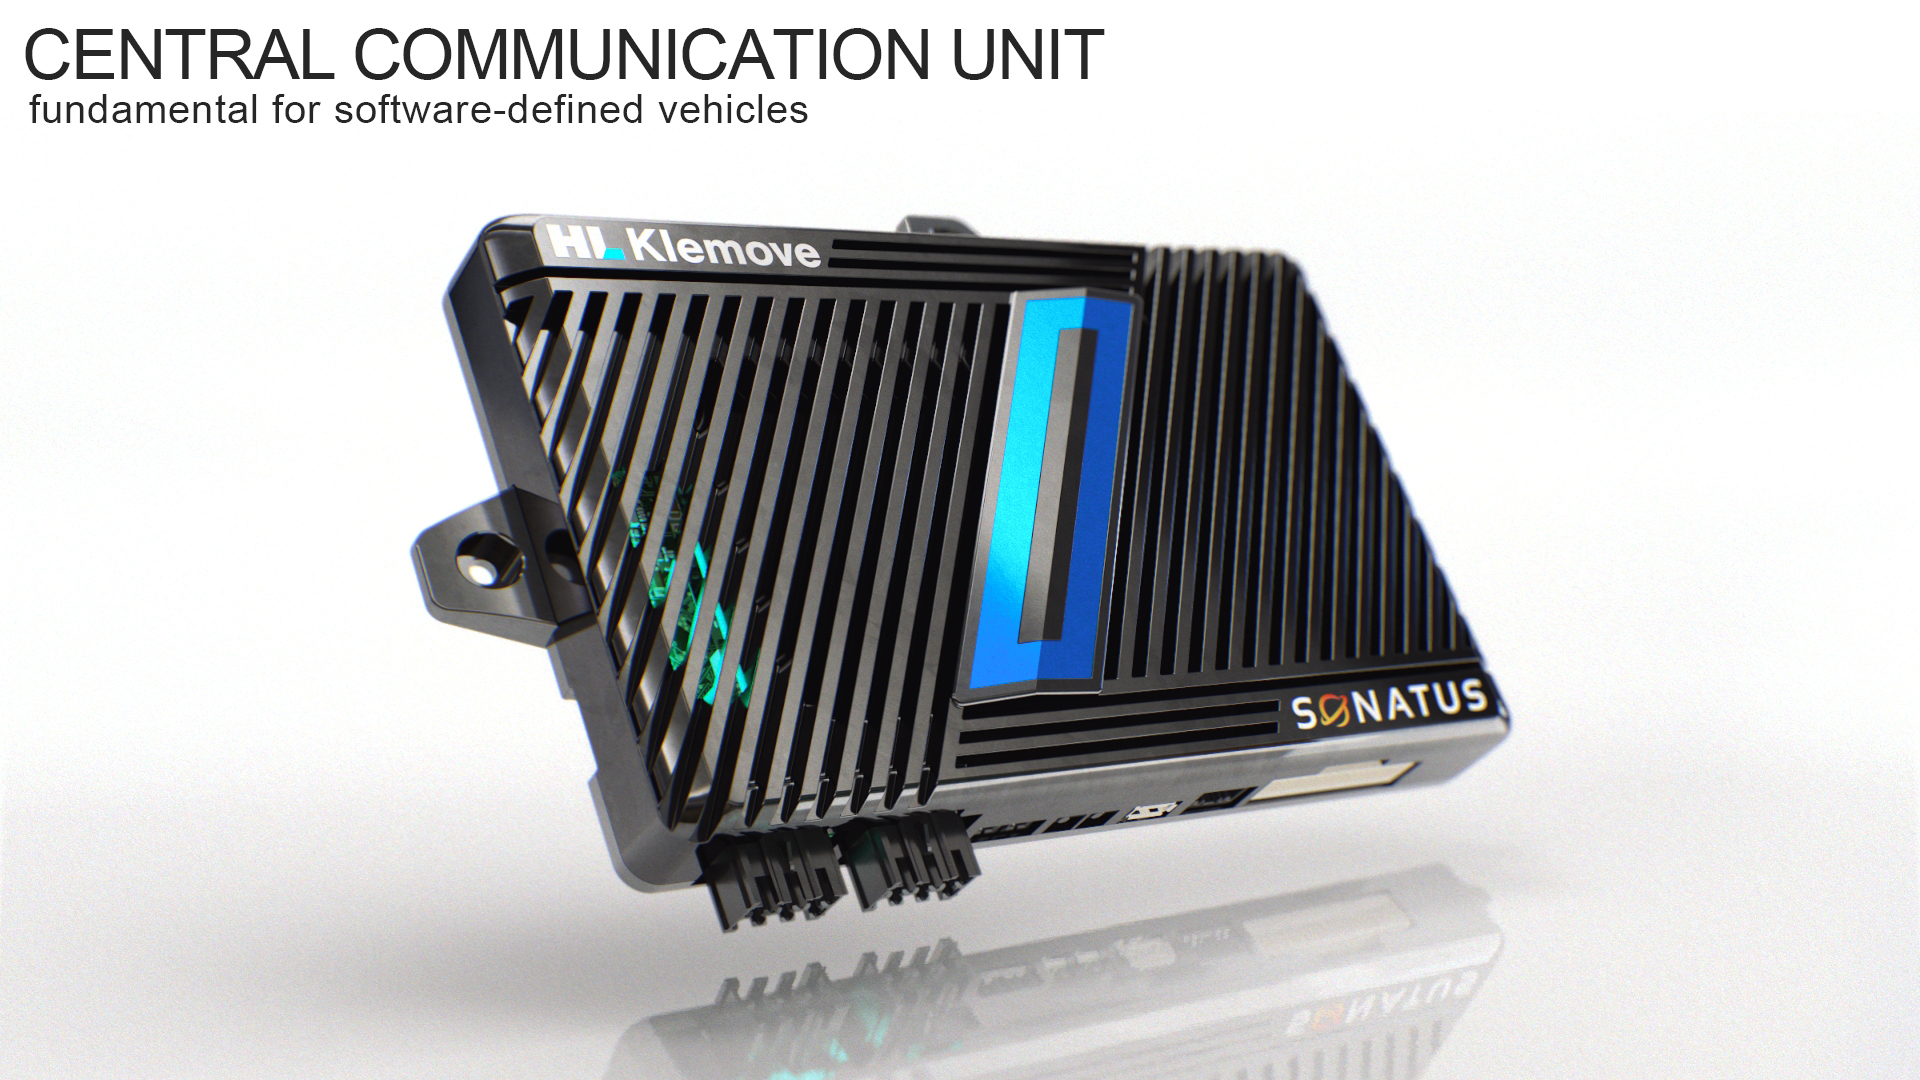 HL Klemove and Sonatus Announce Collaboration to Enable Next-Generation E/E Architecture for Software-Defined Vehicle Applications